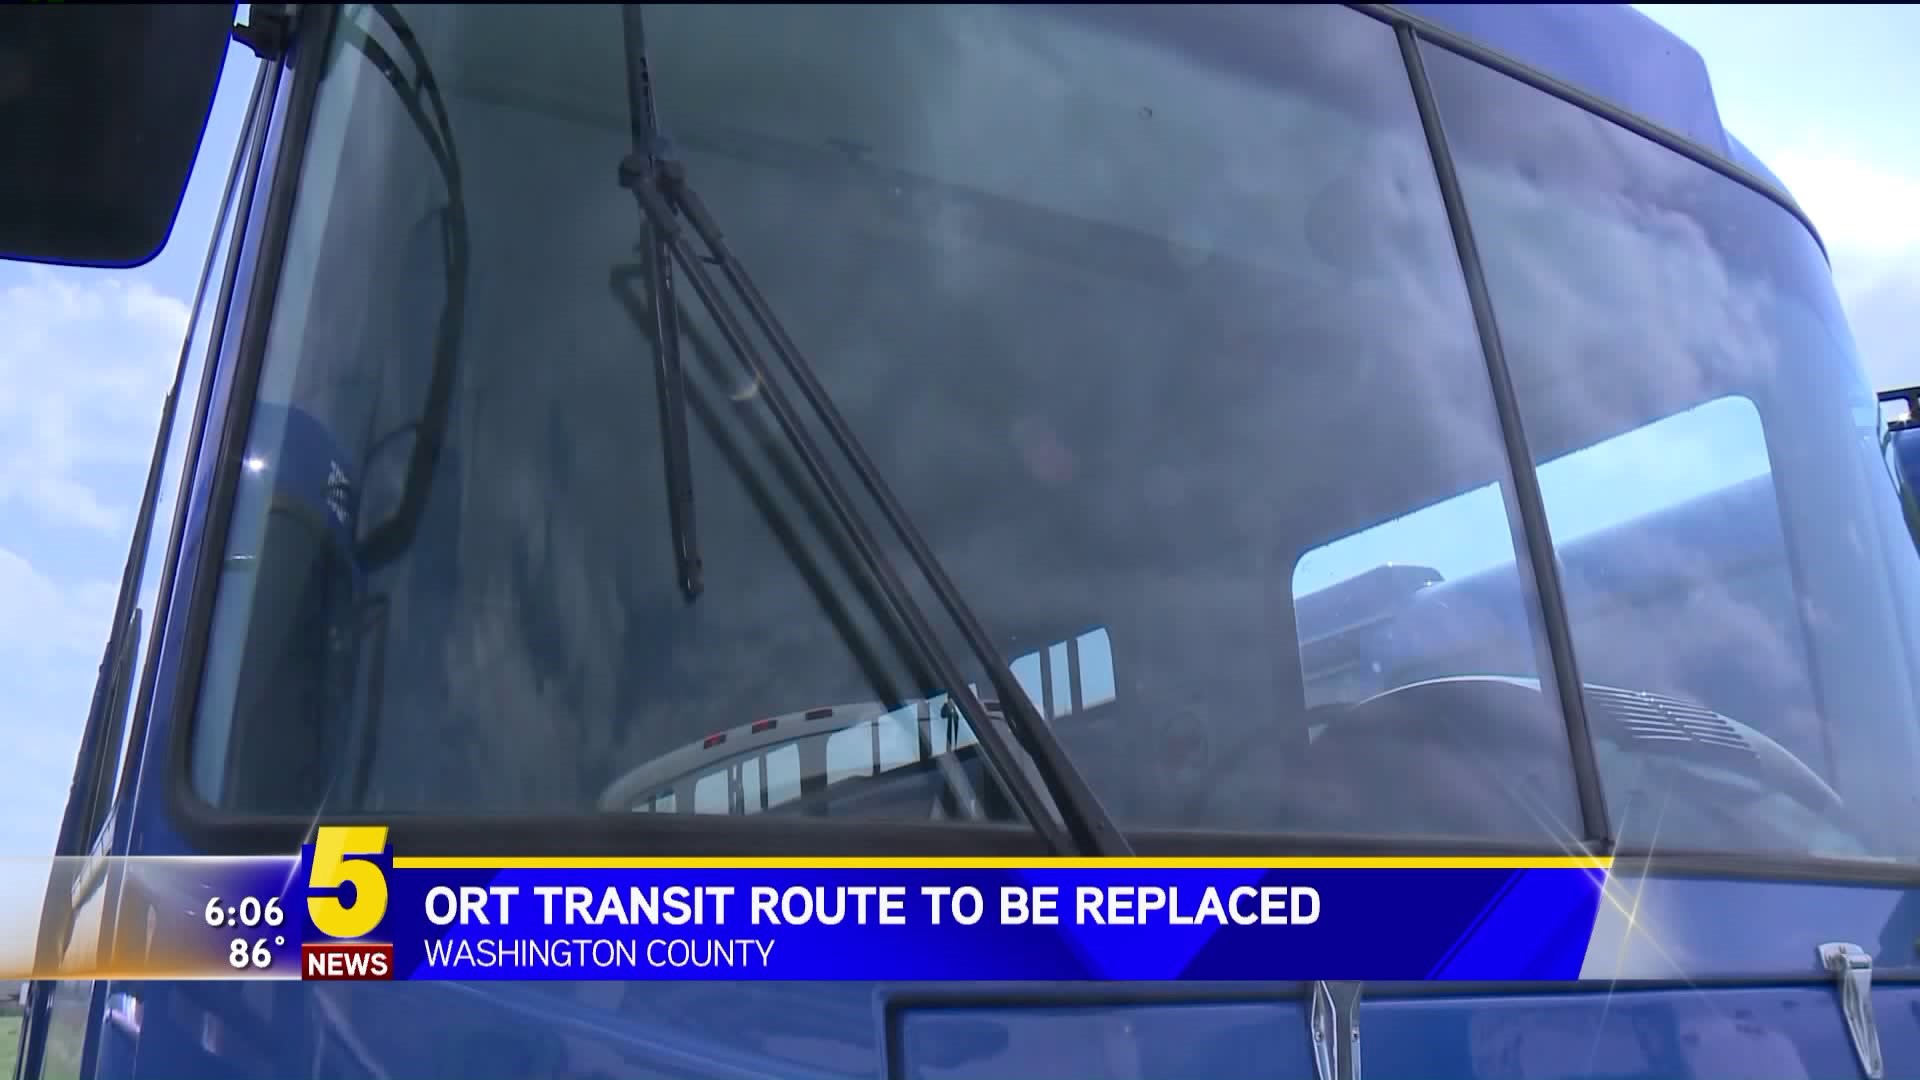 ORT Transit Route To Be Replaced